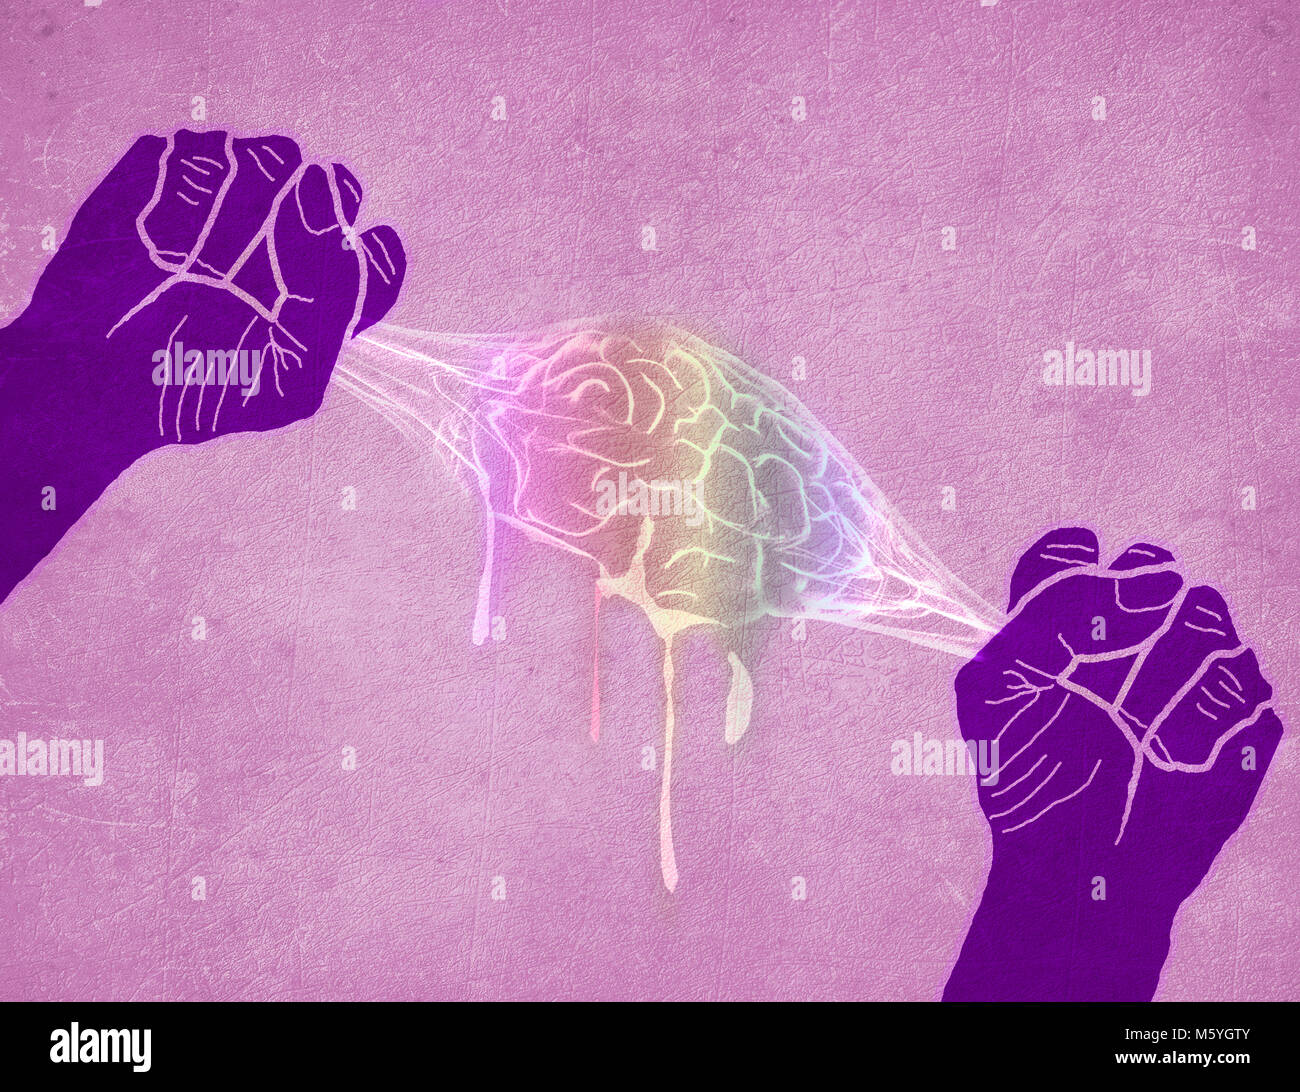 two hands squeezing brain colored digital illustration Stock Photo